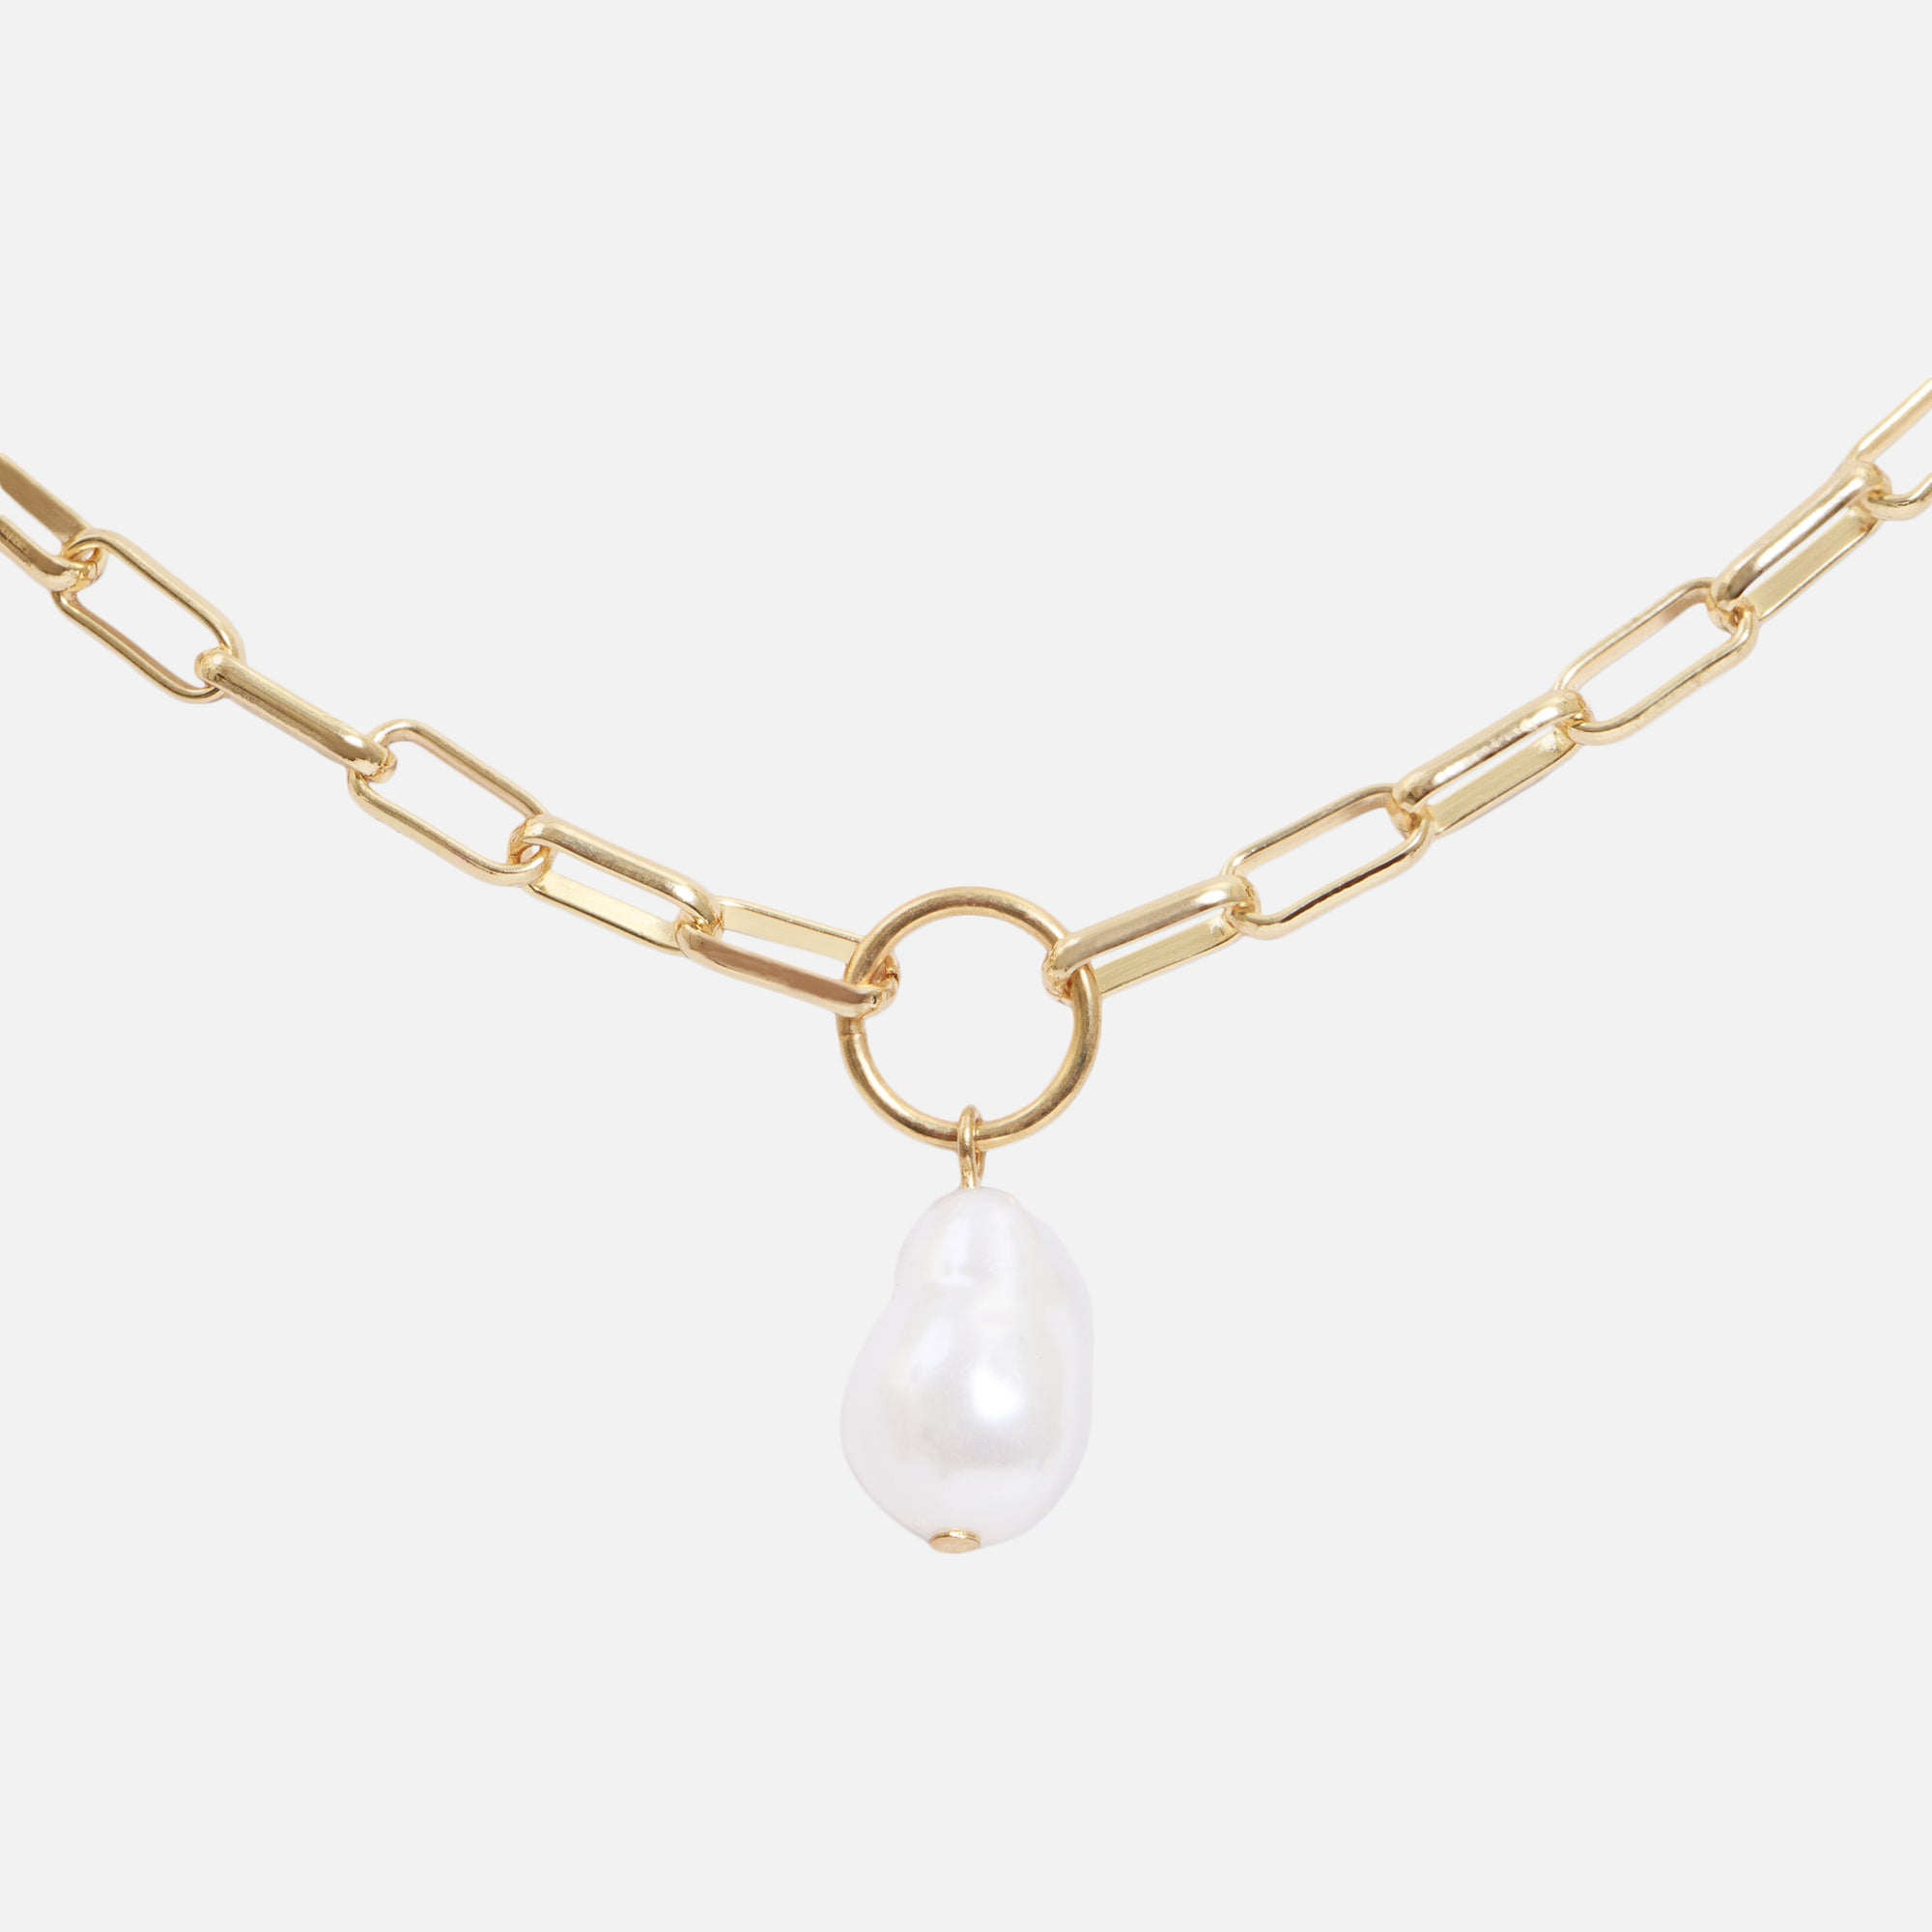 Massive and square golden chain necklace with pearl charm